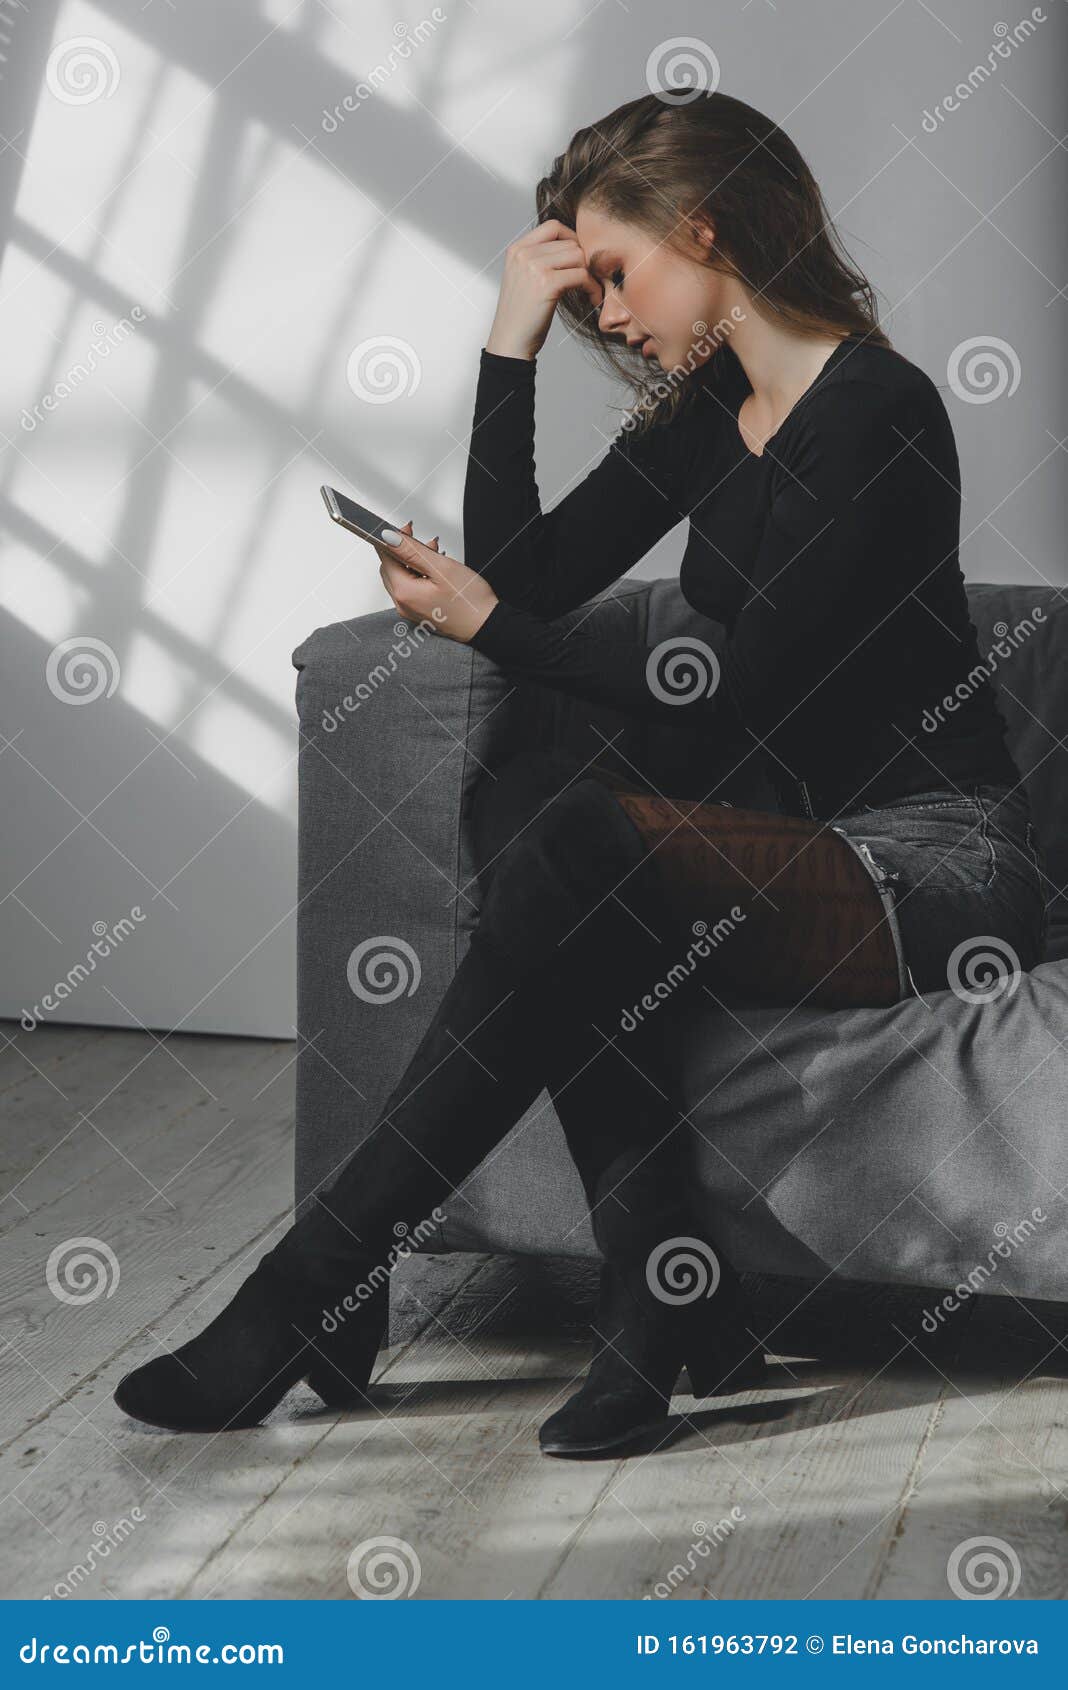 Portrait of a Young Sad Crying Girl with a Smartphone in Her Hand ...